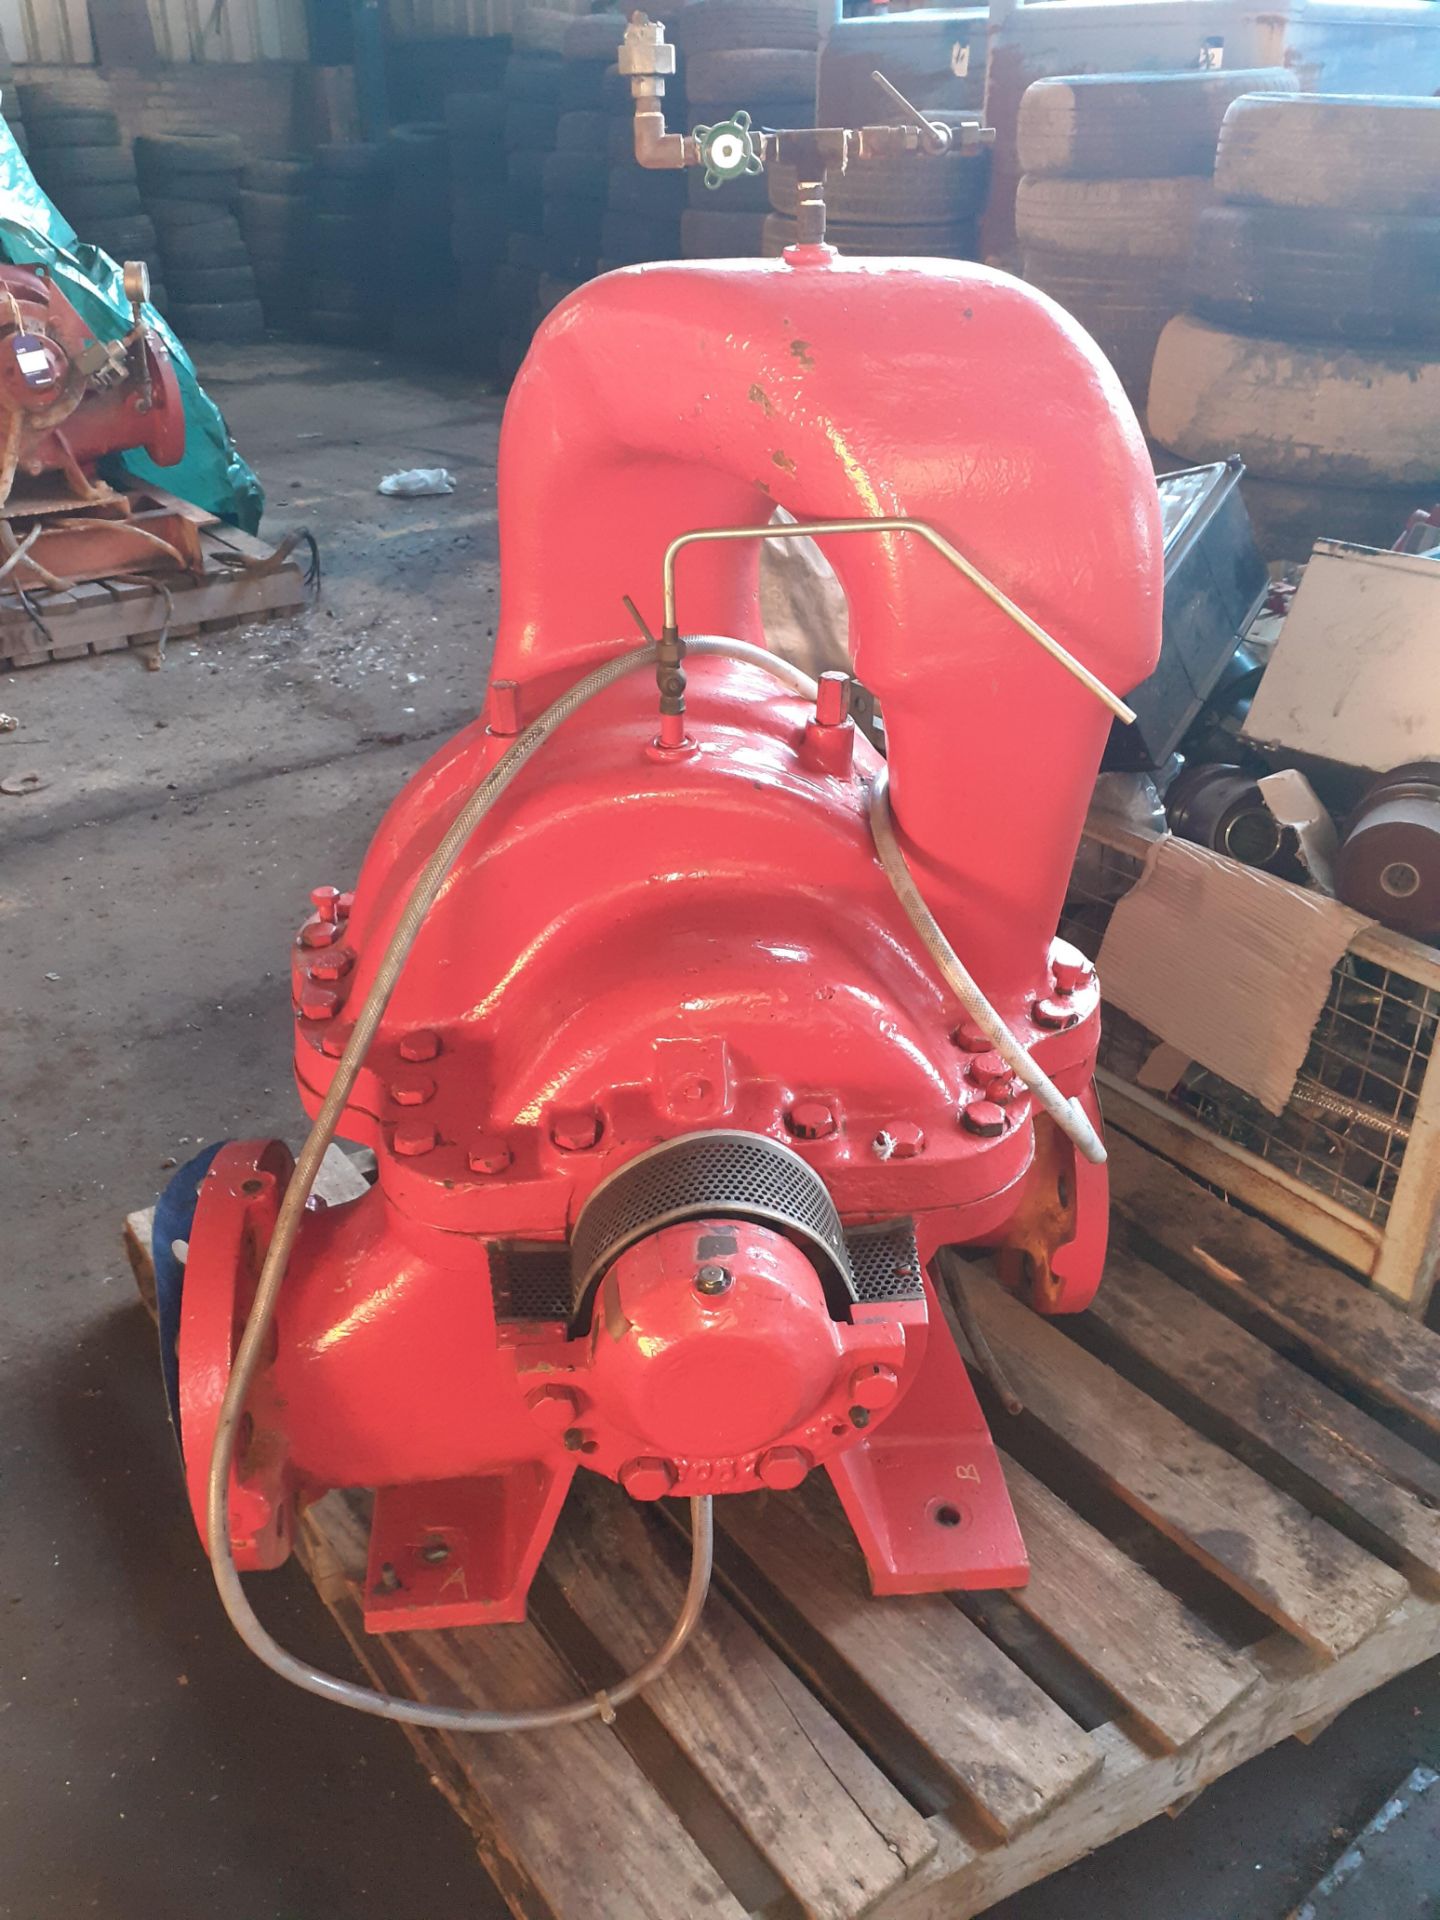 Skid Mounted 6 cylinder Volvo Penta Turbo Diesel Engine with Axflow Fire Pump - Image 10 of 10